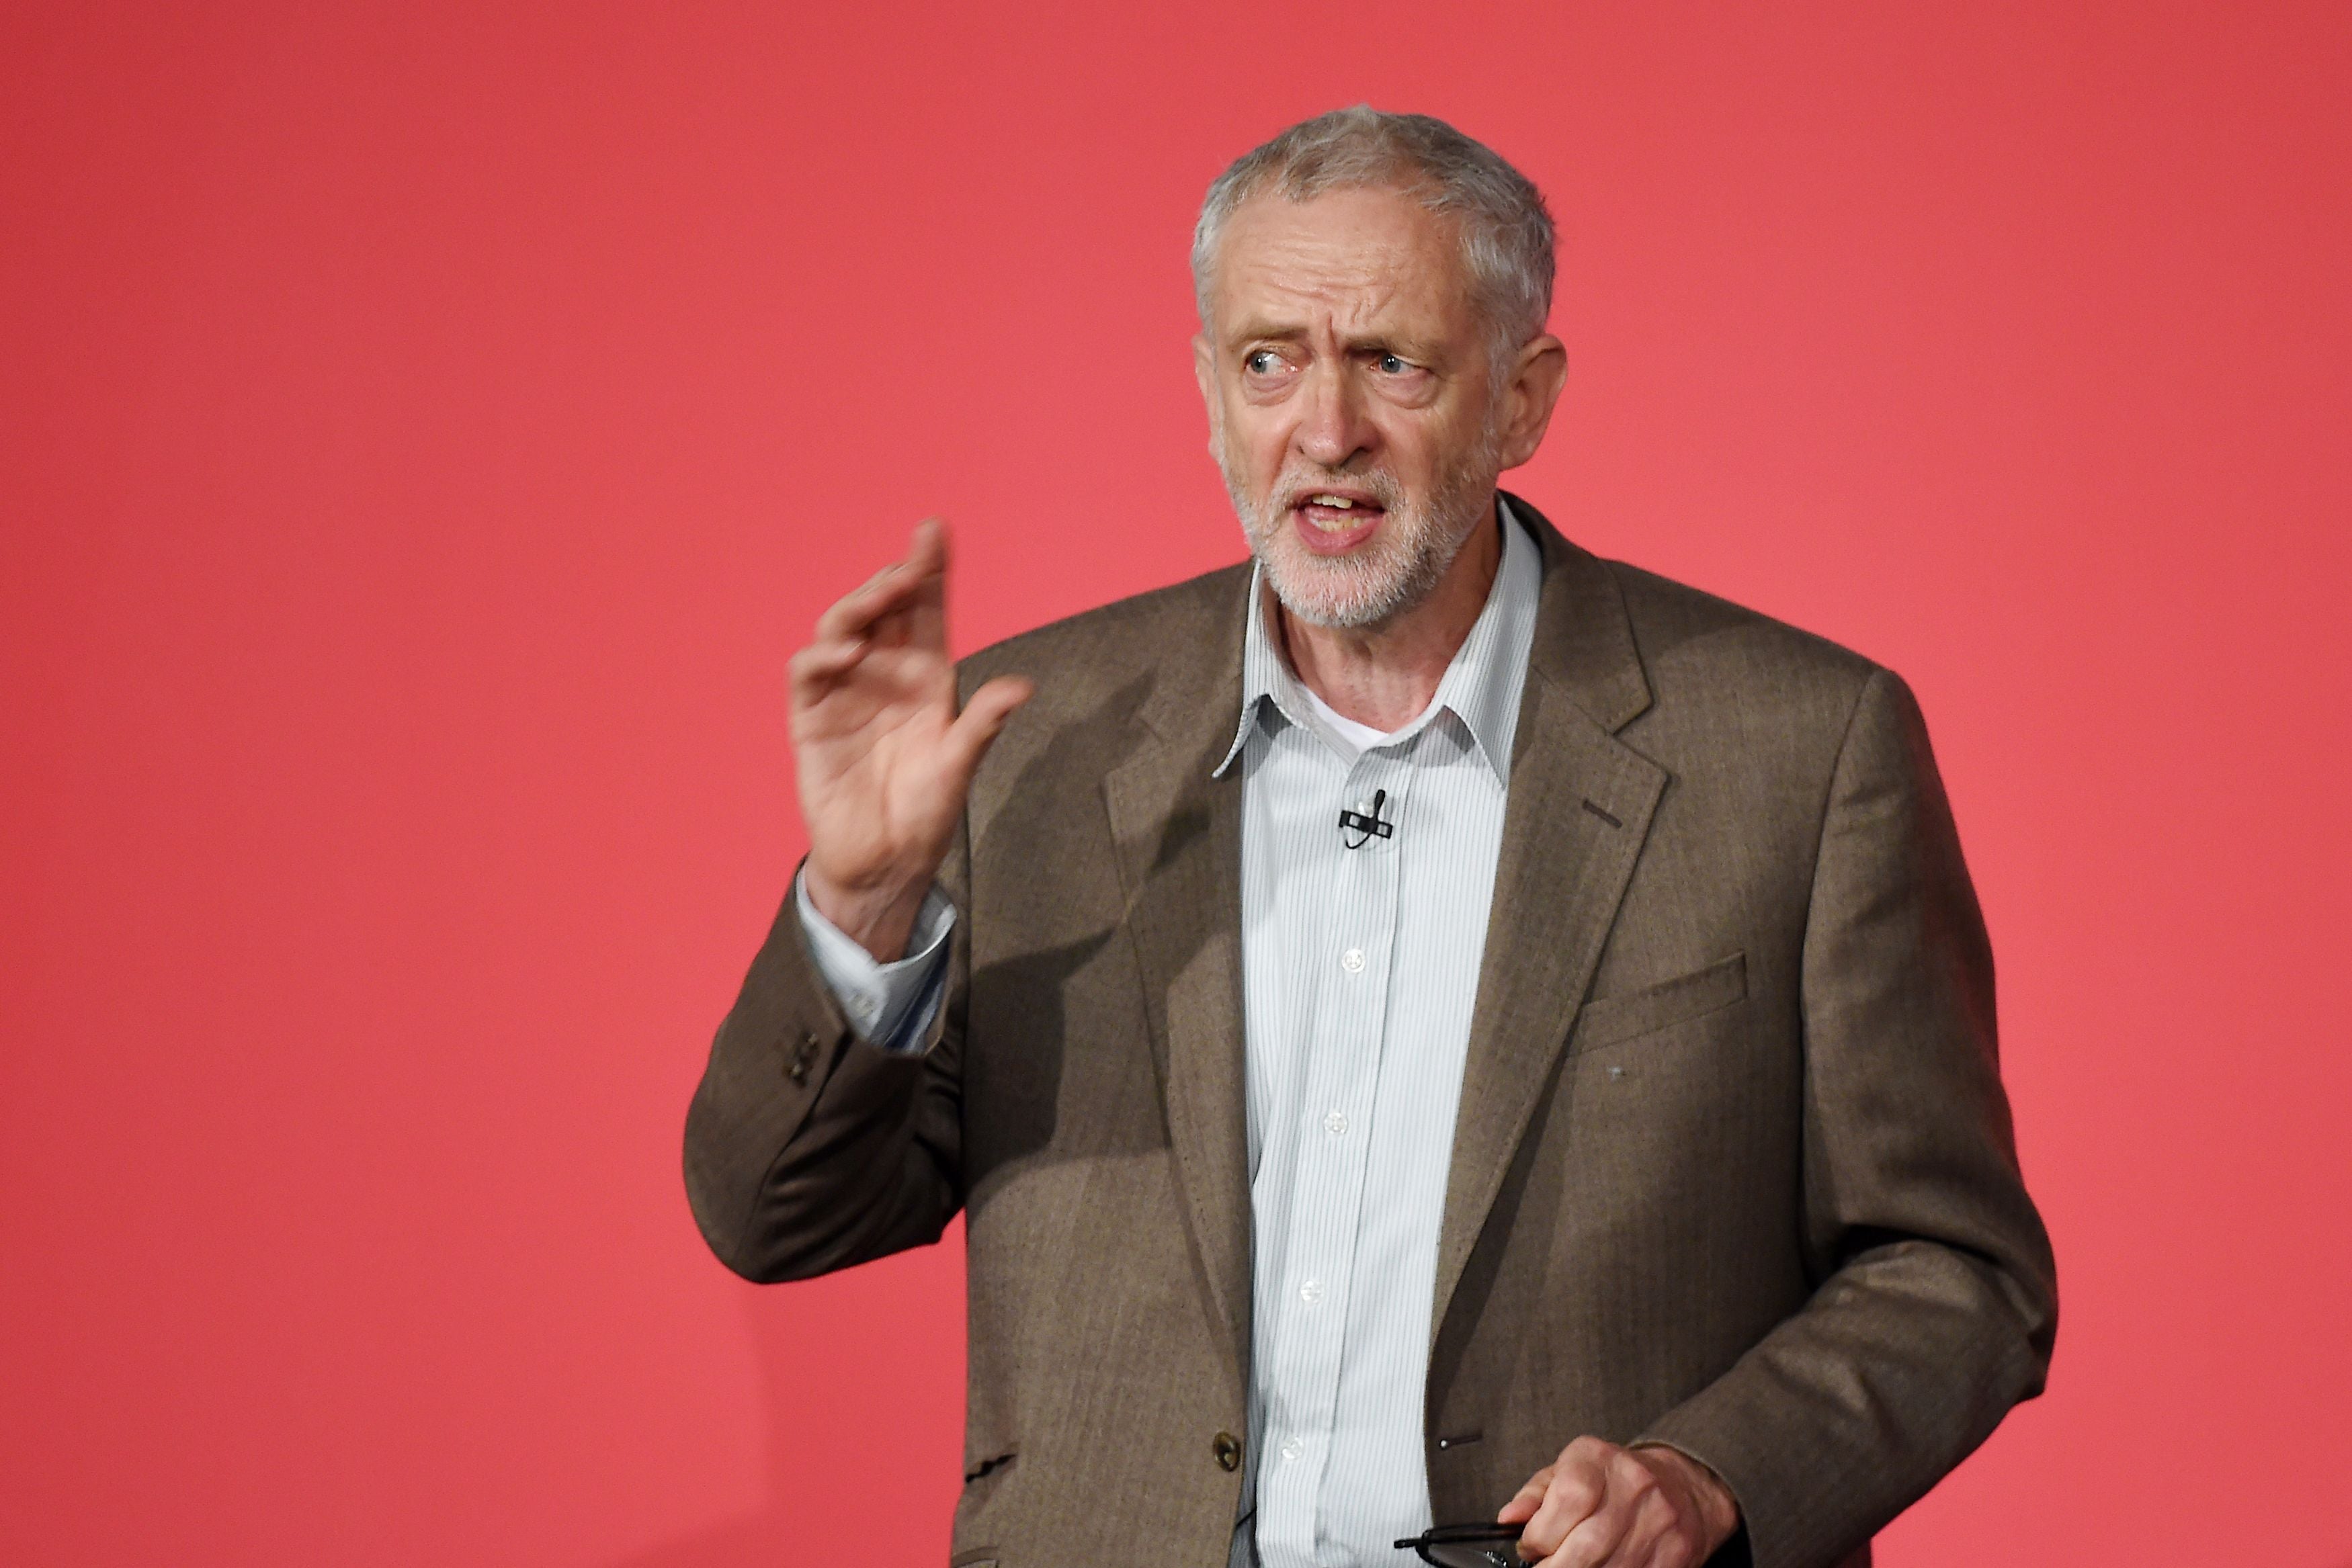 Jeremy Corbyn tells bankers to 'watch out' for a windfall tax on their profits if he is elected Prime Minister in 2020